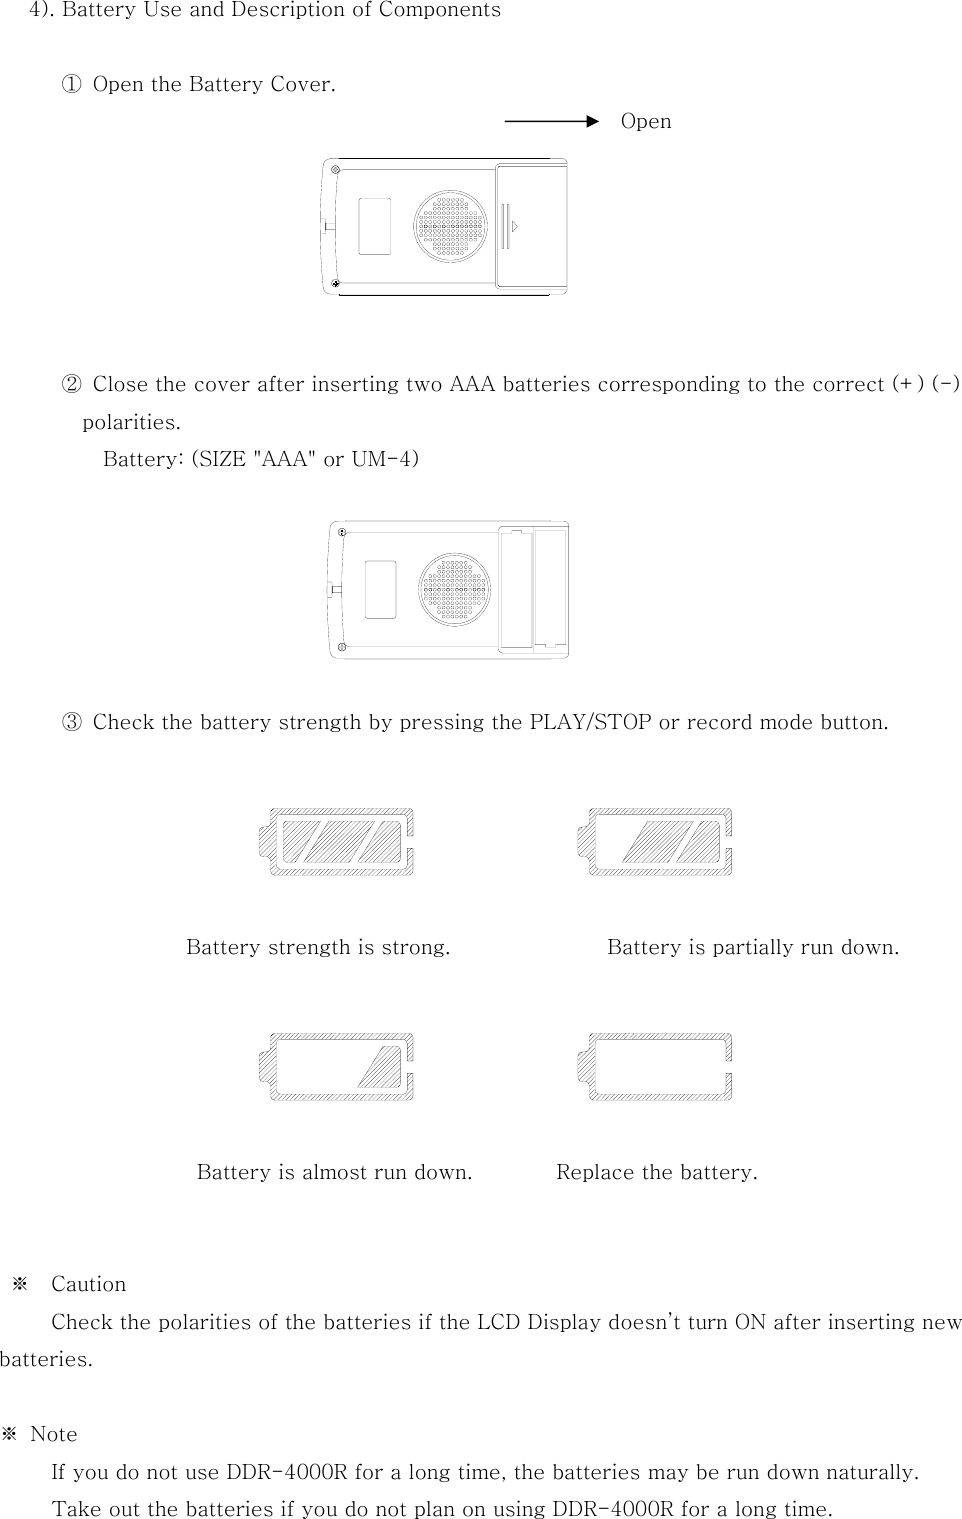   4). Battery Use and Description of Components  ①  Open the Battery Cover.                                   ②  Close the cover after inserting two AAA batteries corresponding to the correct (+) (-) polarities.           Battery: (SIZE &quot;AAA&quot; or UM-4)                   ③  Check the battery strength by pressing the PLAY/STOP or record mode button.                                 Battery strength is strong.               Battery is partially run down.                   Battery is almost run down.        Replace the battery.             ※  Caution           Check the polarities of the batteries if the LCD Display doesn’t turn ON after inserting new batteries.       ※  Note           If you do not use DDR-4000R for a long time, the batteries may be run down naturally.           Take out the batteries if you do not plan on using DDR-4000R for a long time. Open 